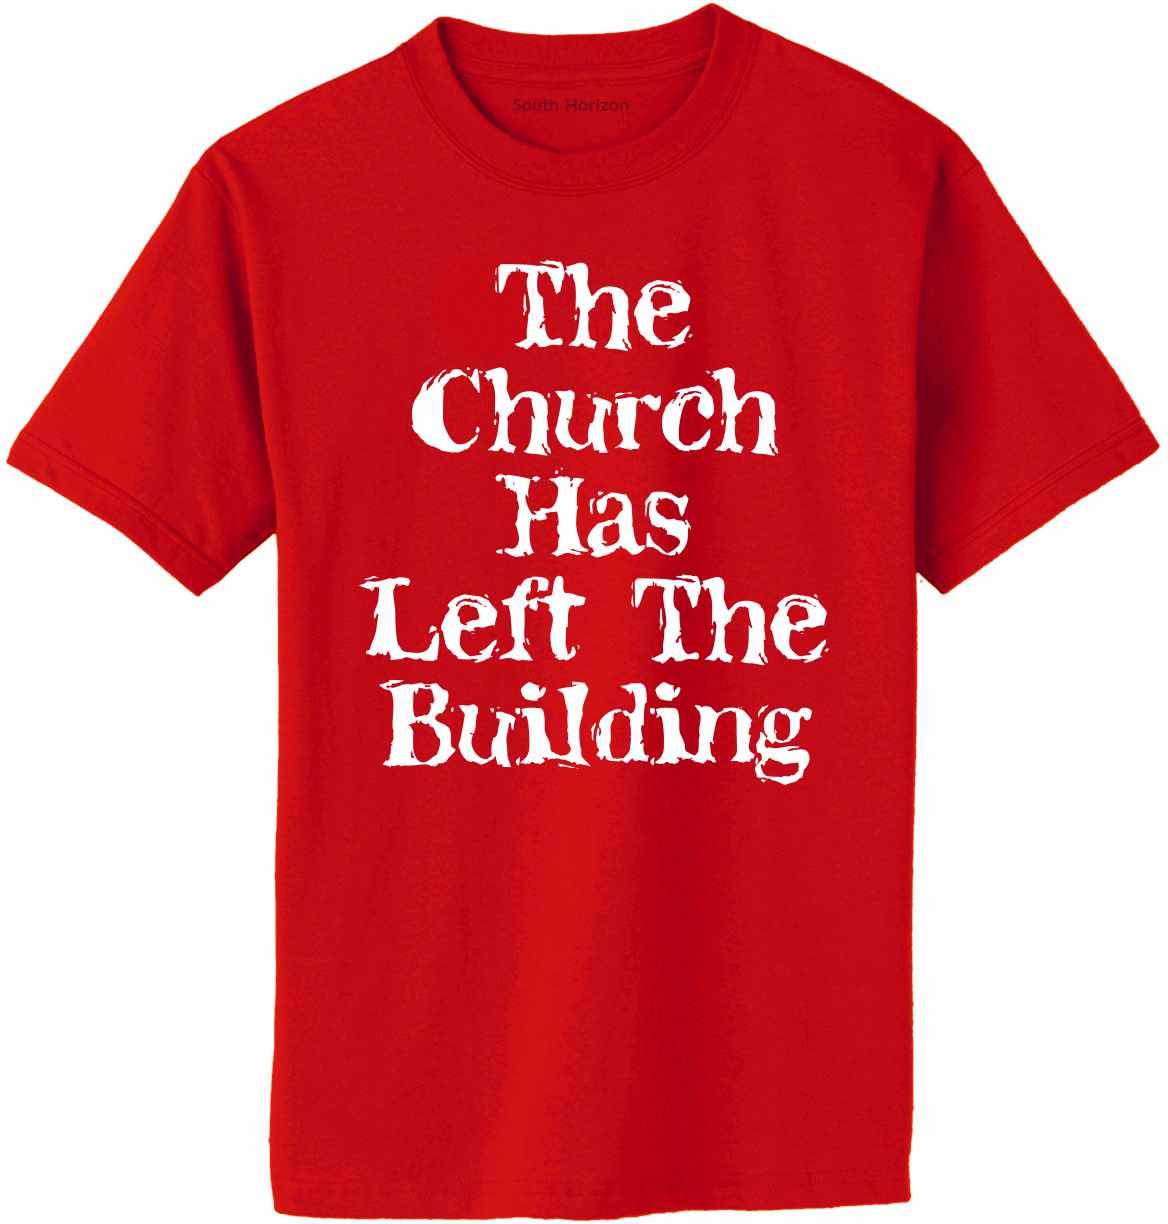 The Church Has Left The Building Adult T-Shirt (#1130-1)